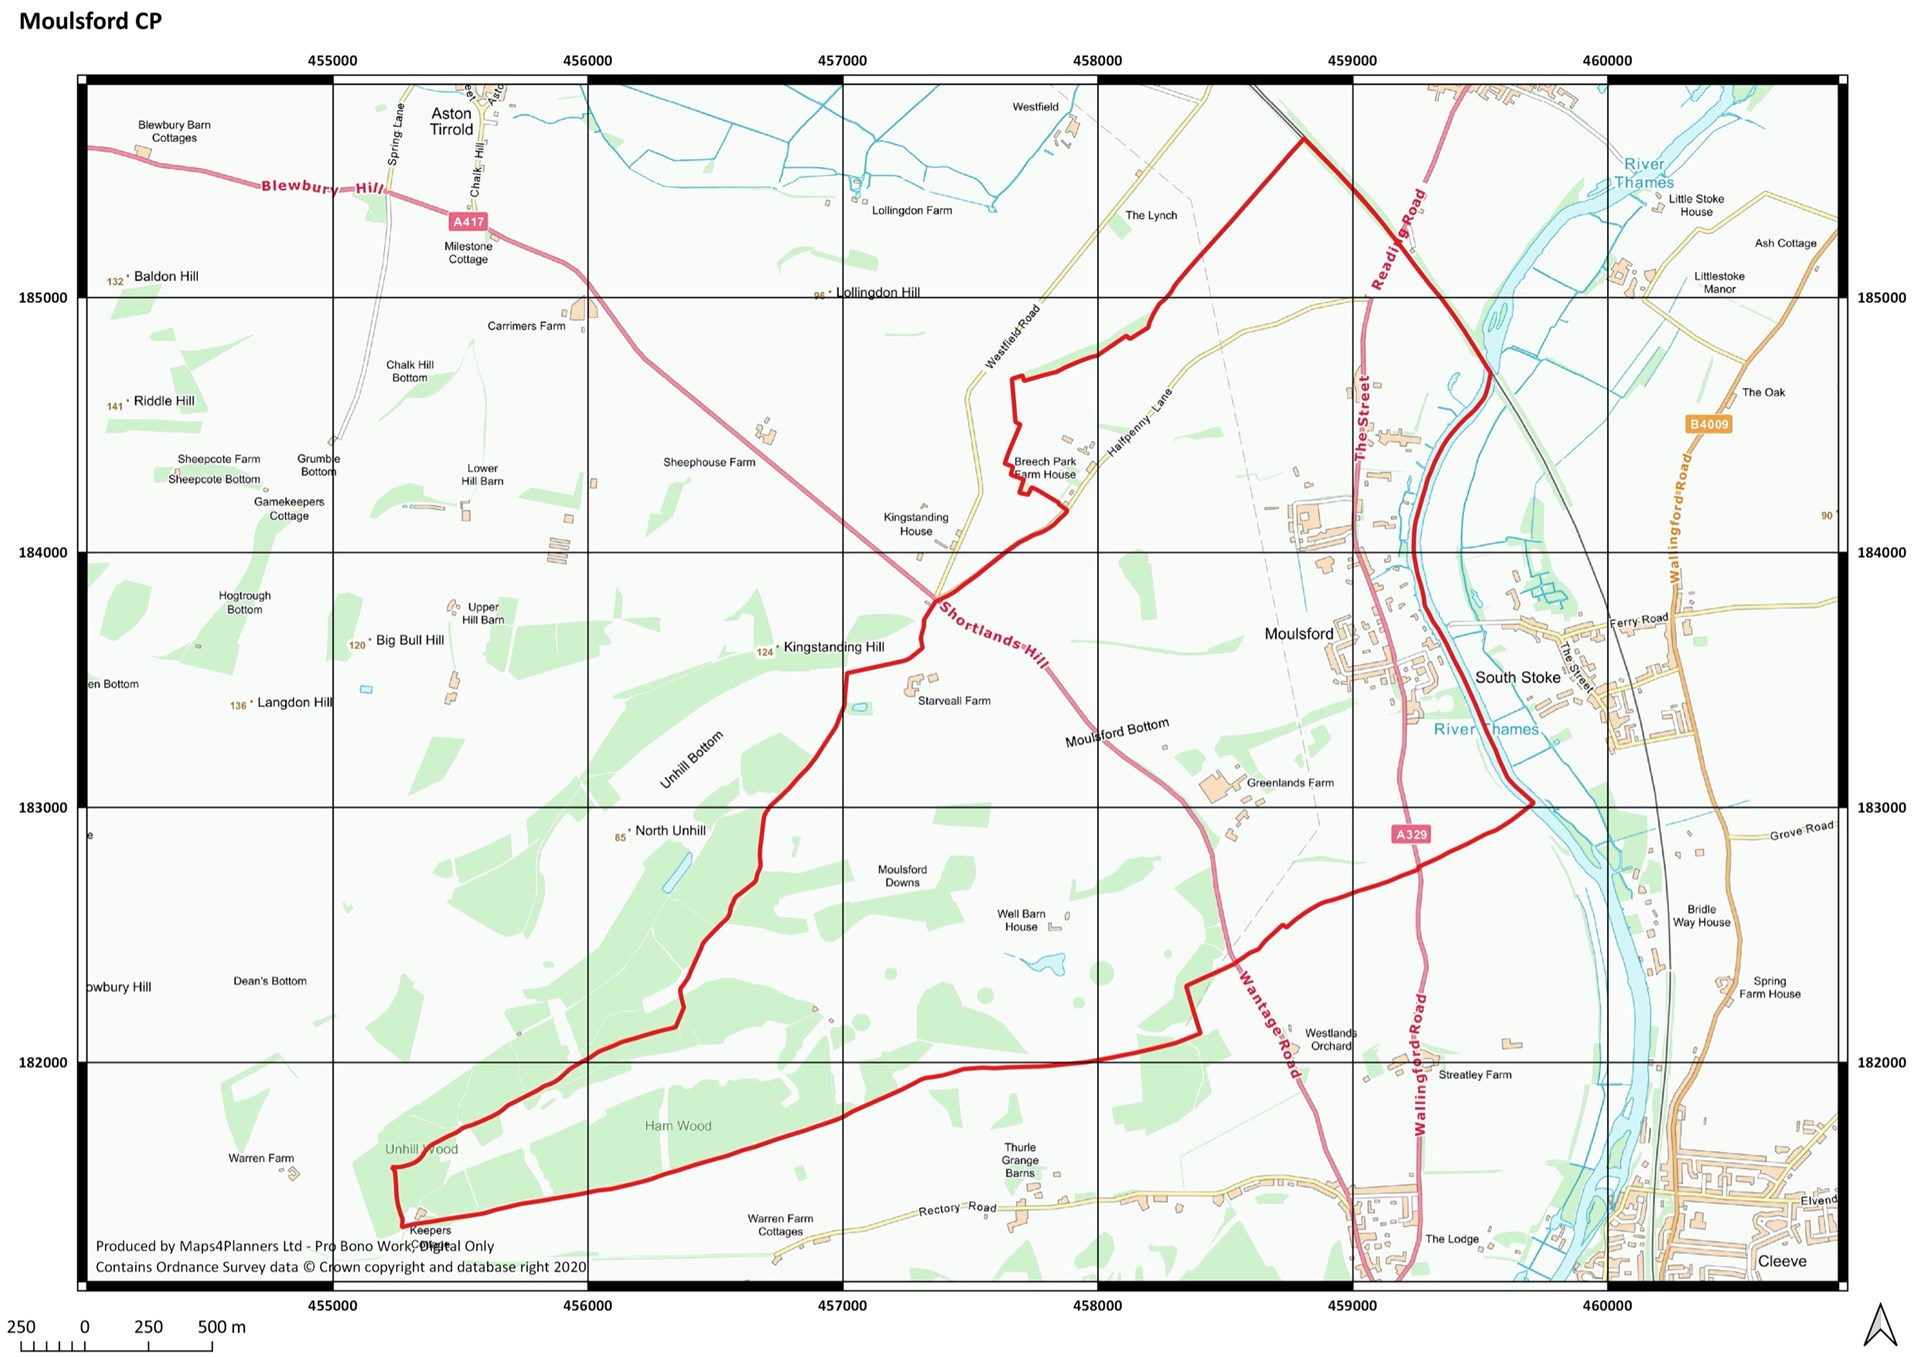 The parish of Moulsford. The boundary is highlighted in red.